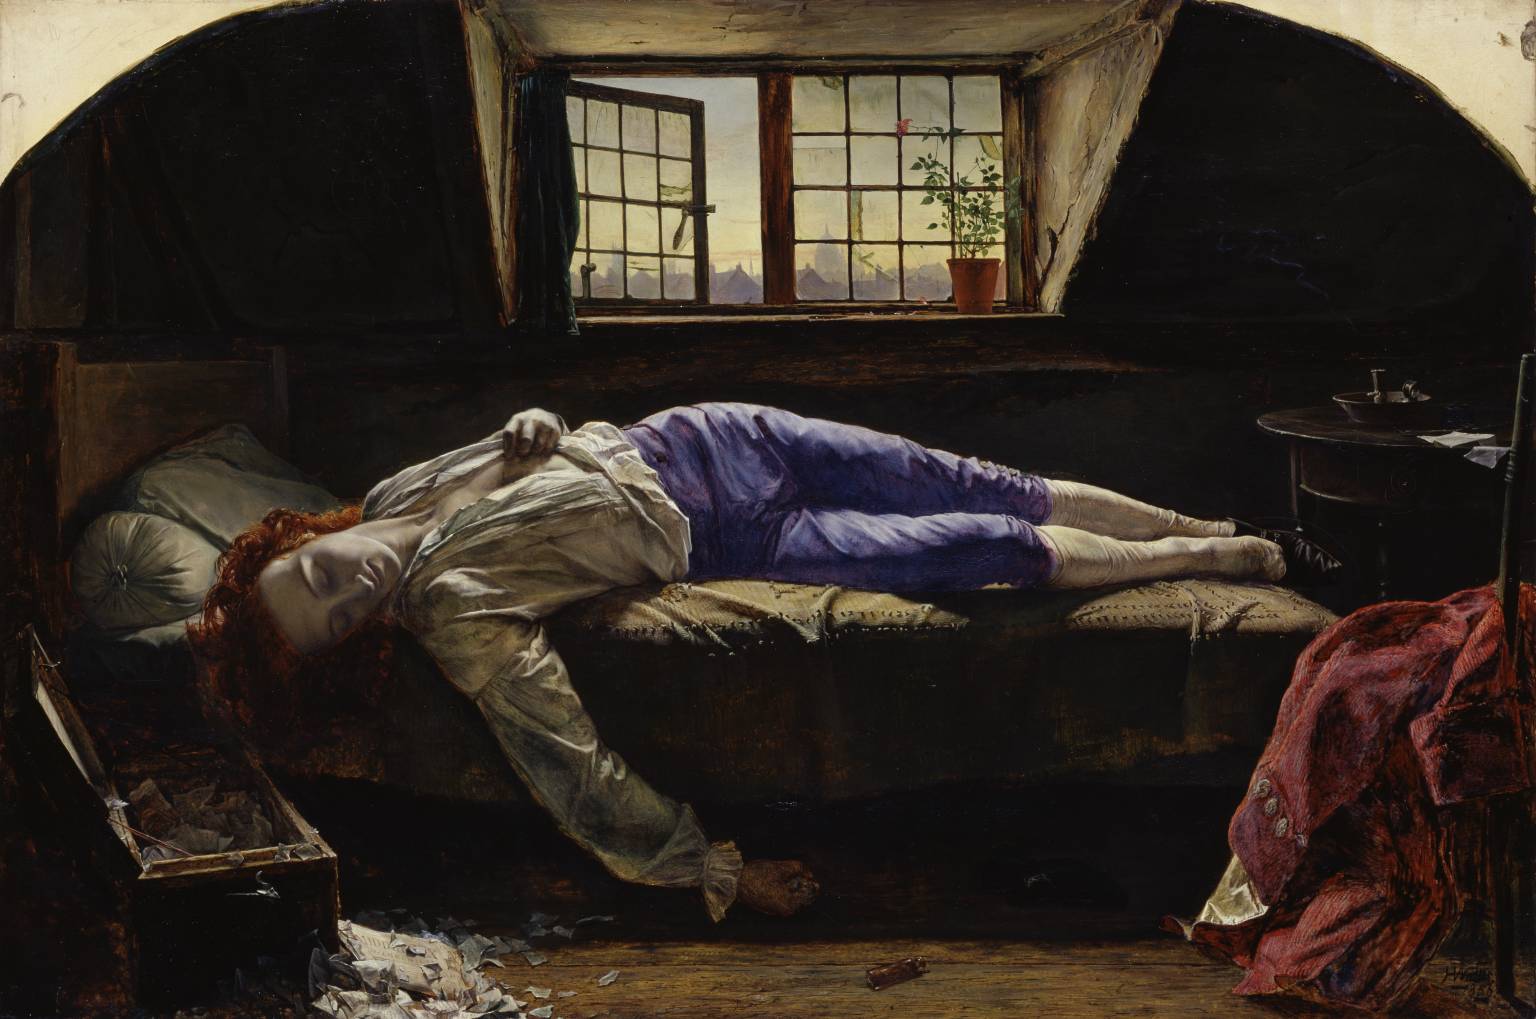 Chatterton 1856 by Henry Wallis 1830-1916